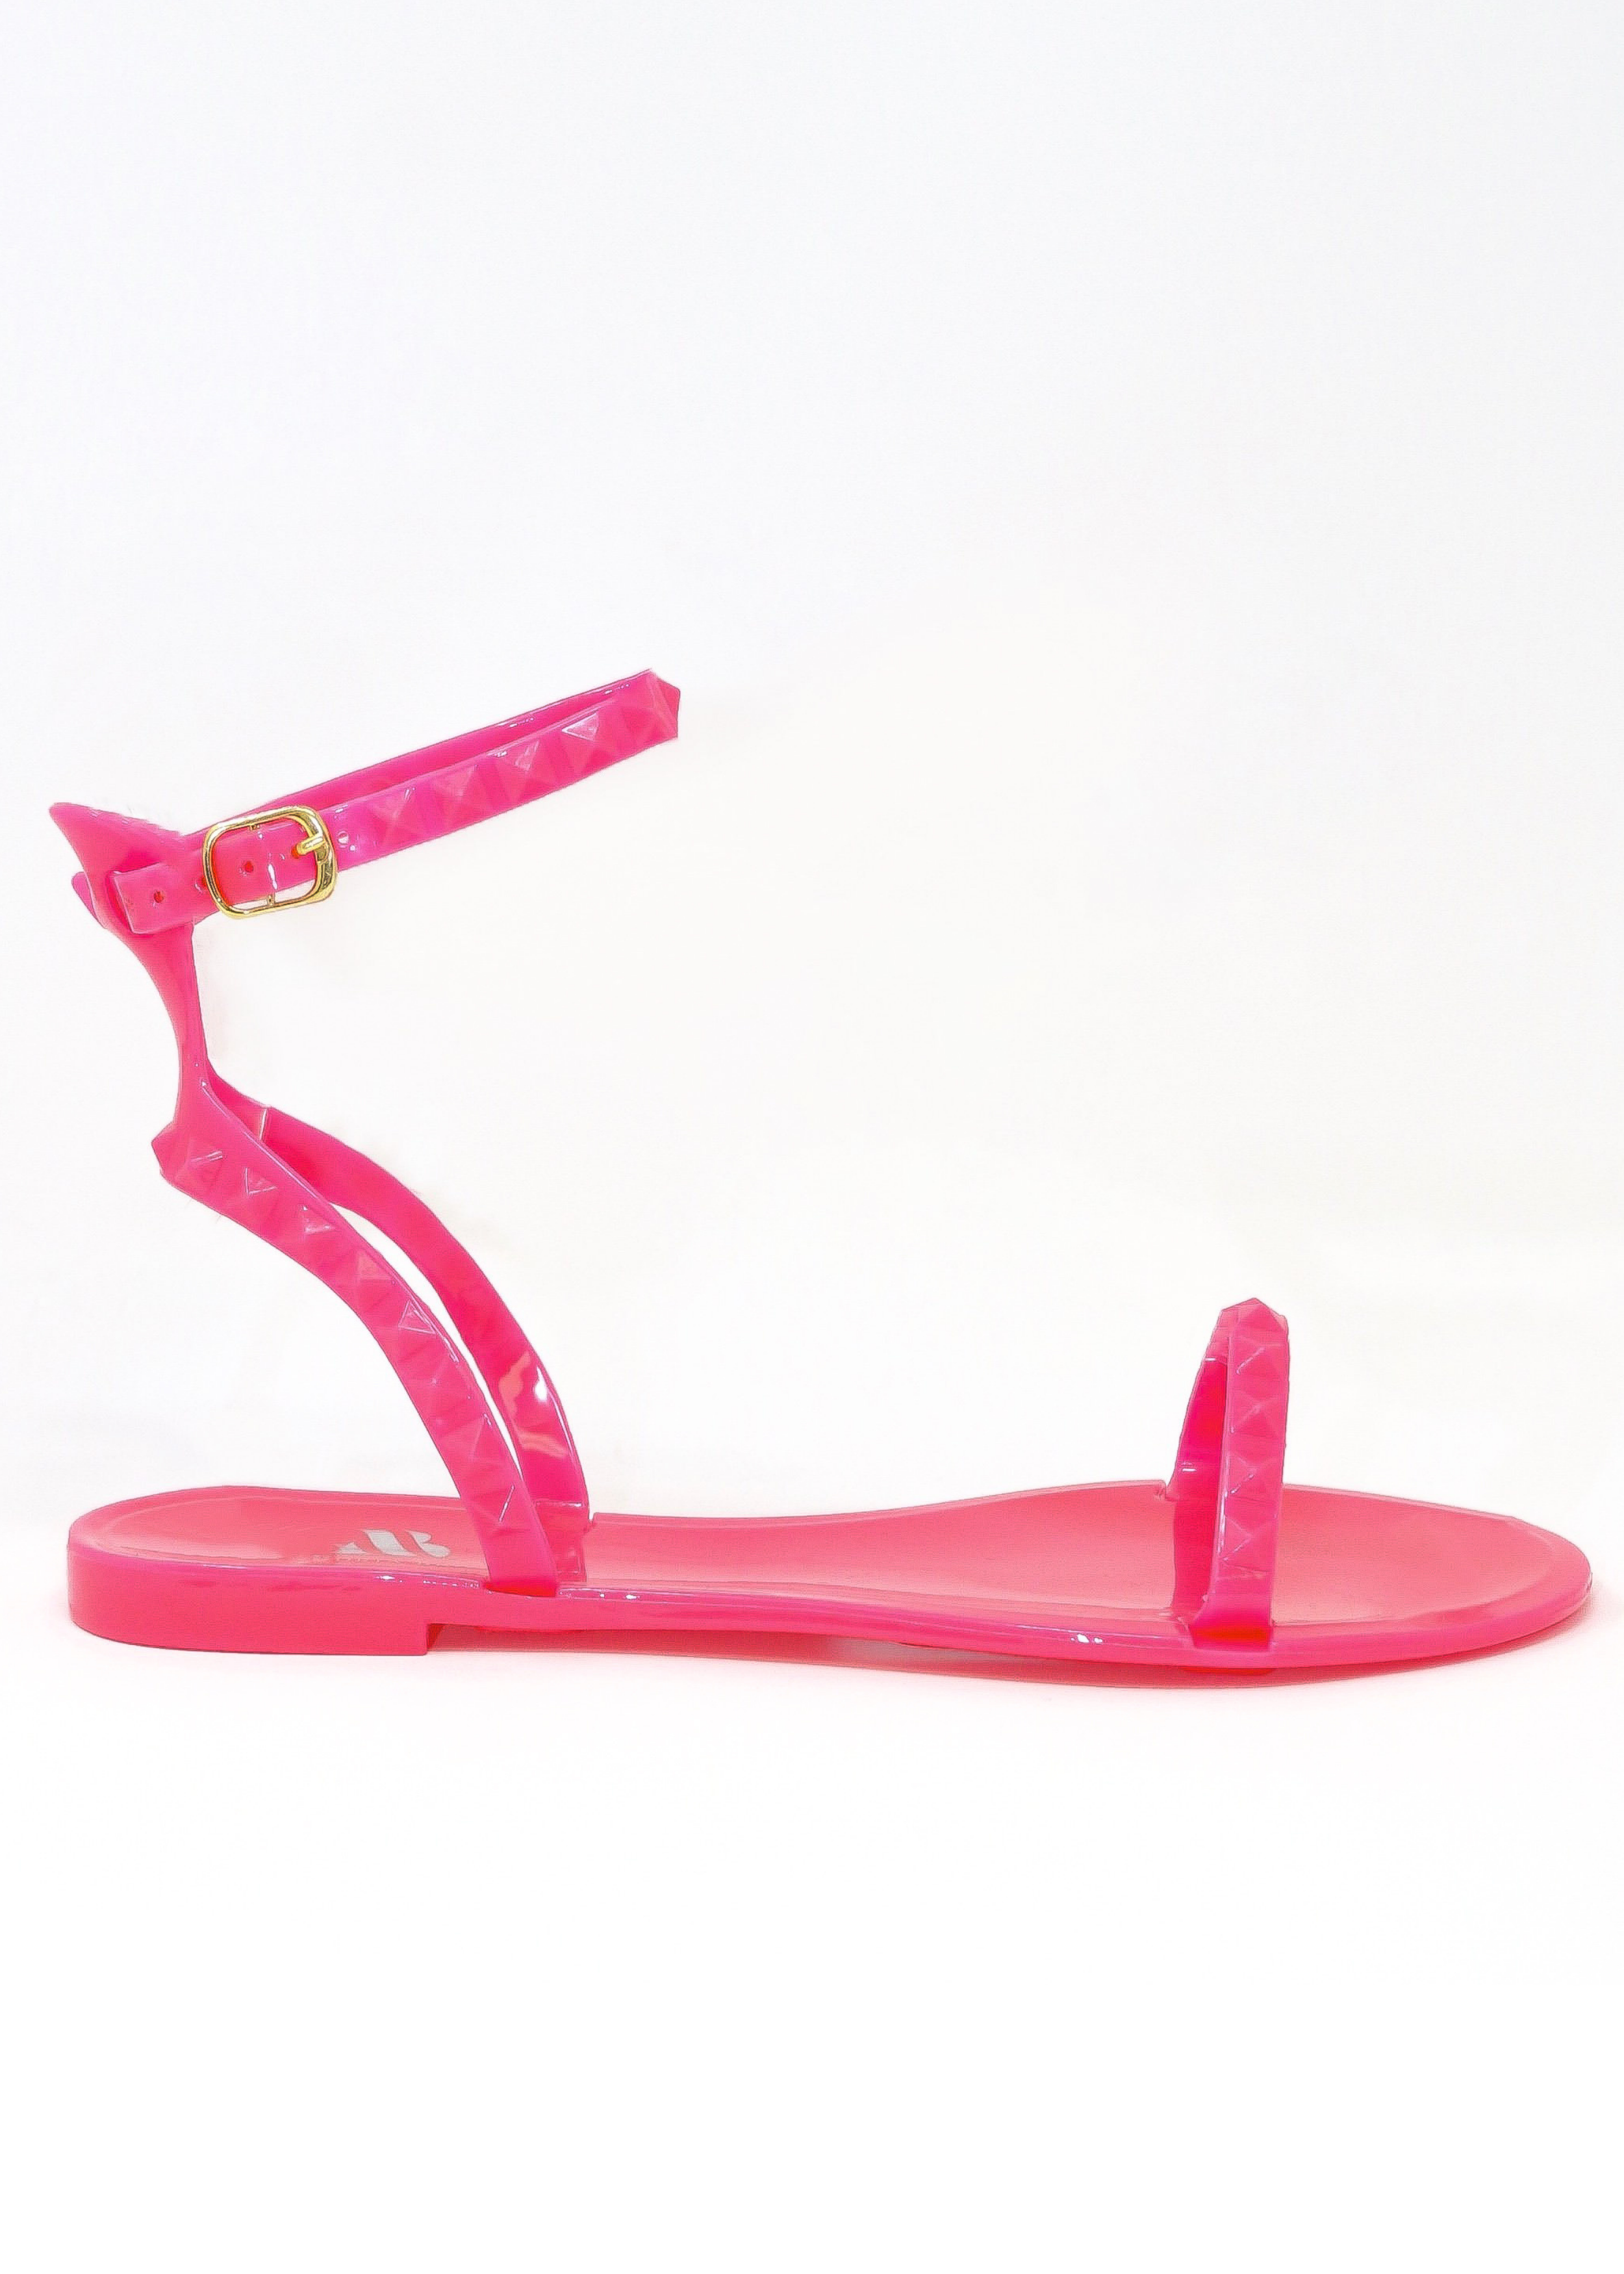 Women's neon pink waterproof jelly sandals for everyday outfits and pool days. Side view